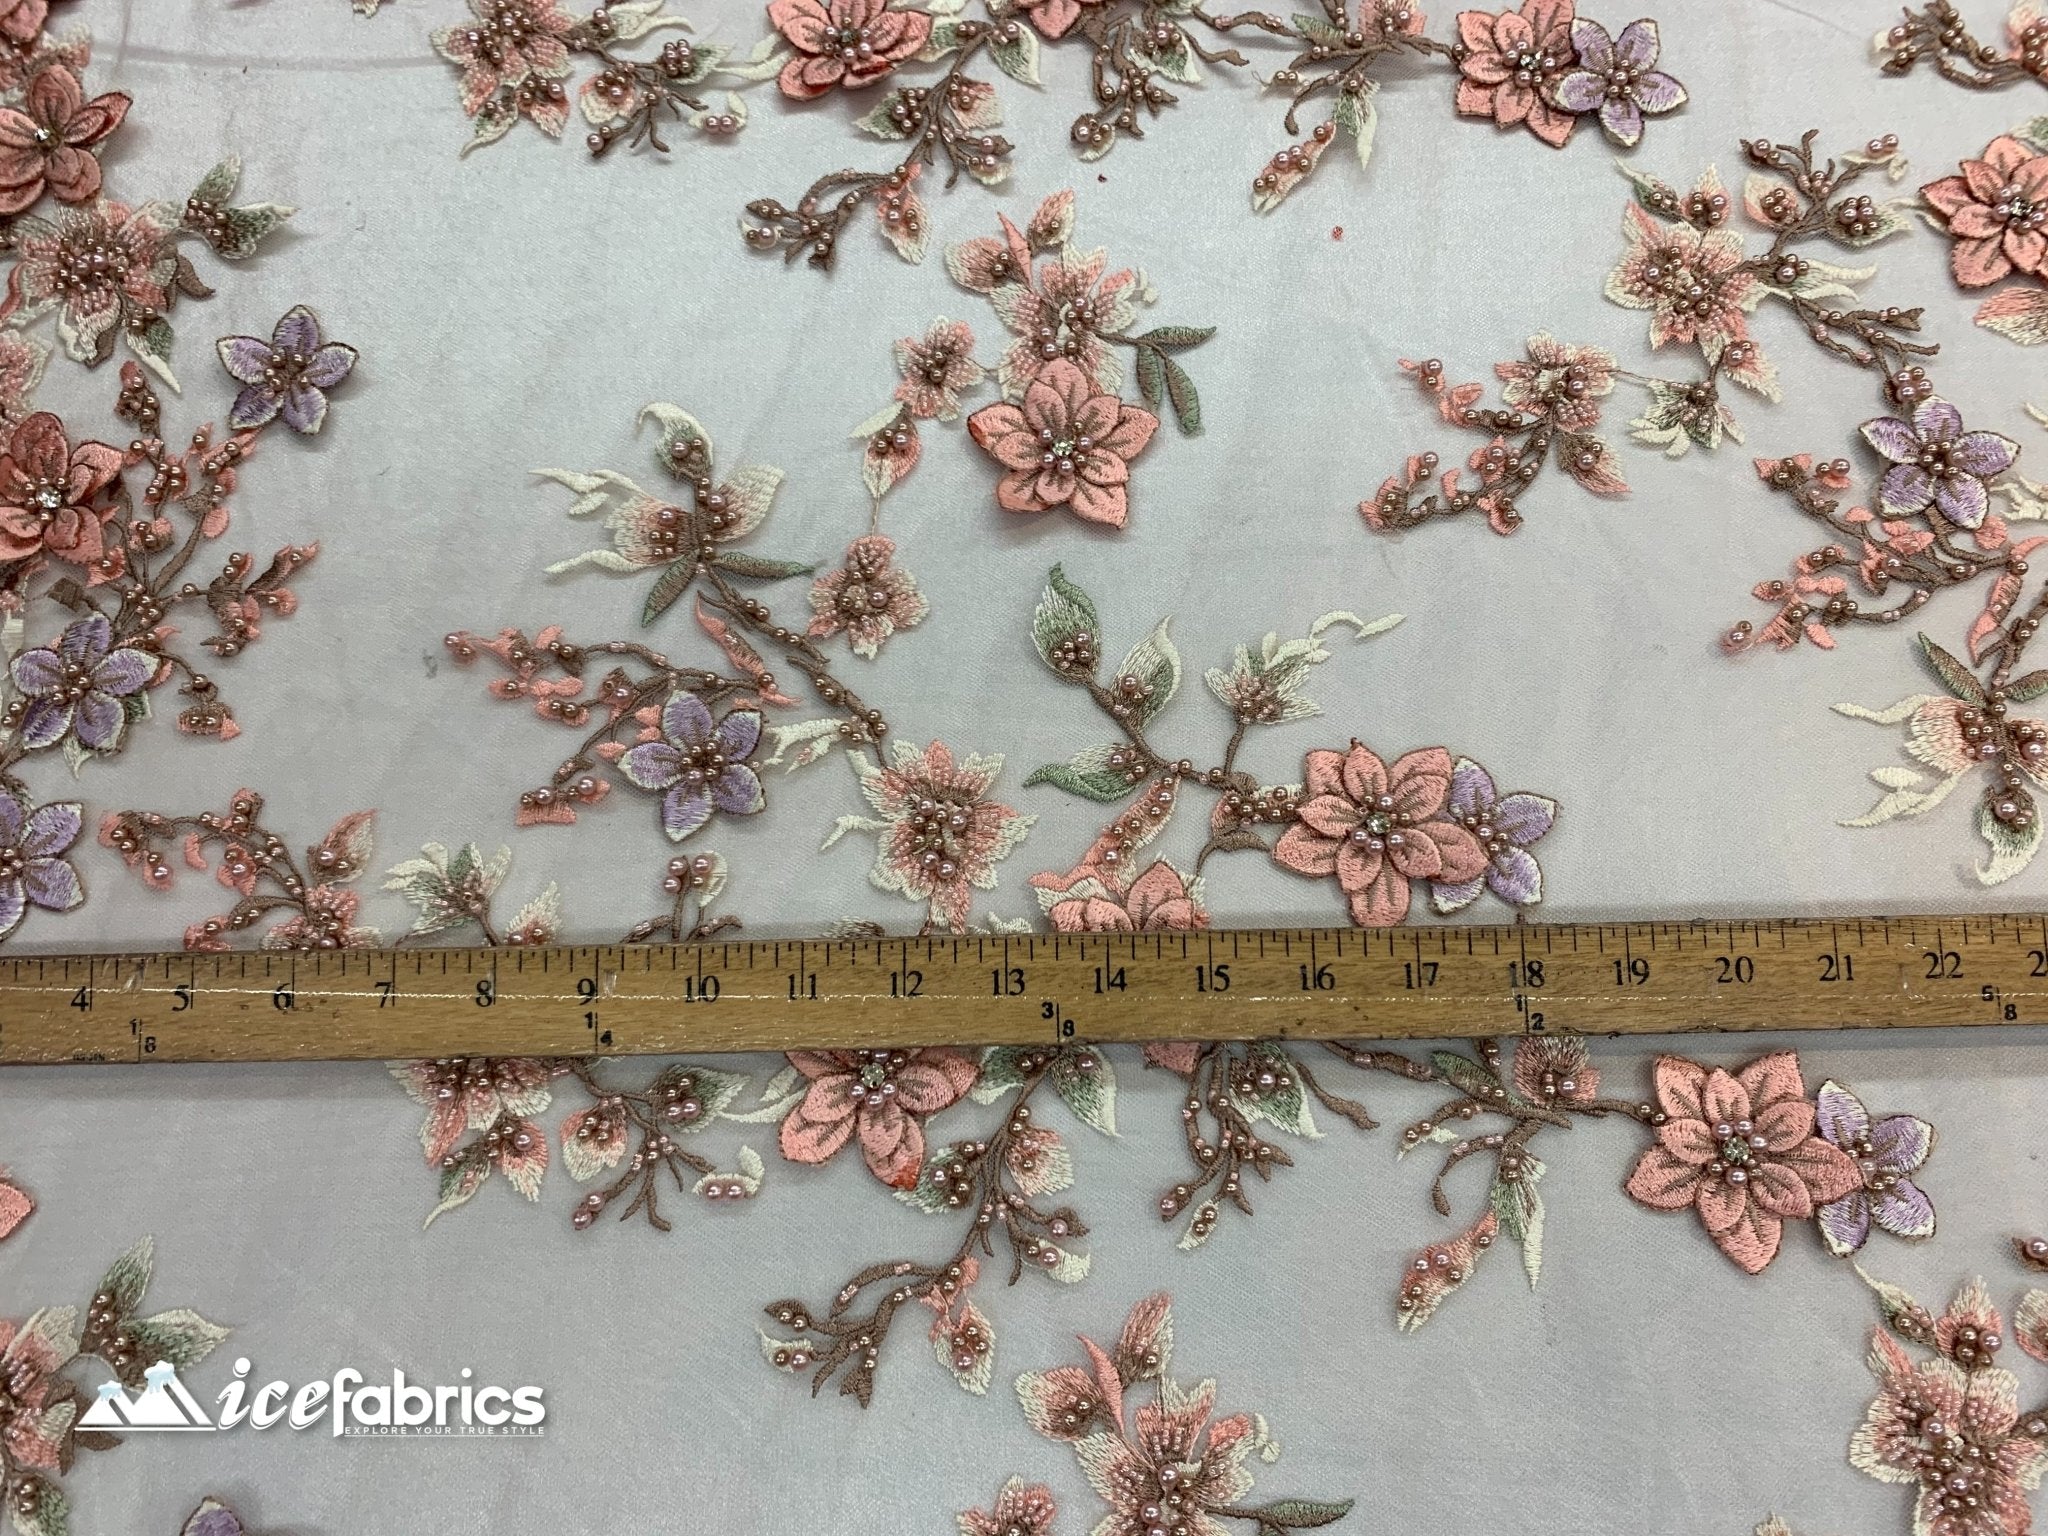 Flowers Embroidered Beaded Fabric/ Mesh Lace Fabric/ Bridal Fabric/ICE FABRICSICE FABRICSDusty RoseFlowers Embroidered Beaded Fabric/ Mesh Lace Fabric/ Bridal Fabric/ ICE FABRICS Dusty Rose